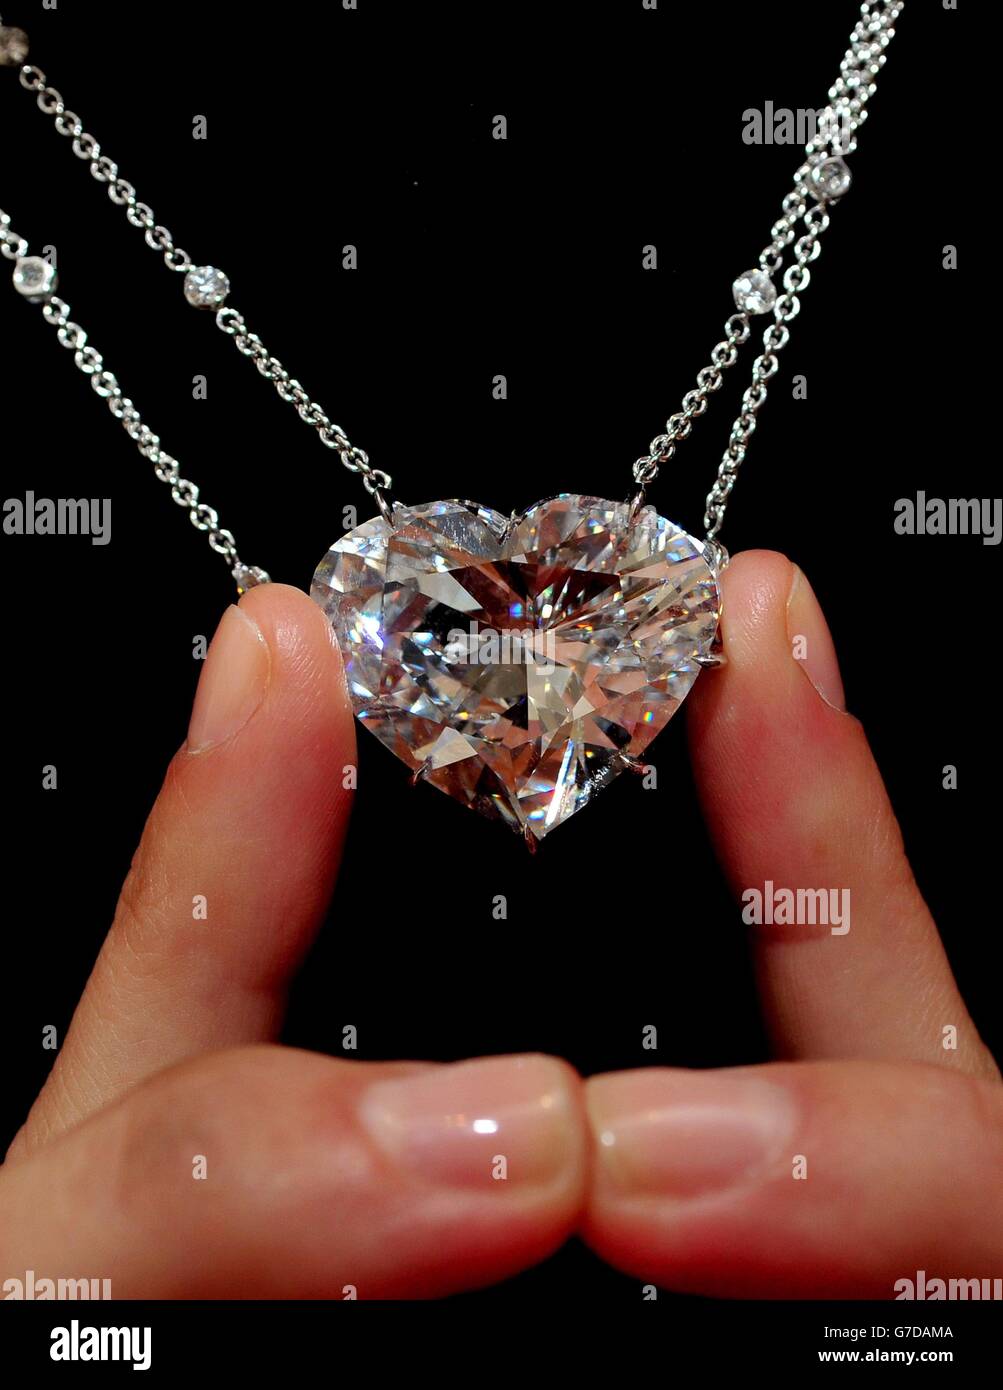 A Sotheby's assistant shows a 50.05 Carat heart-shaped D-colour internally flawless diamond pendant which will form part of their Hong Kong Magnificent Jewels and Jadite Autumn sale on October 7th in Hong Kong with an estimate of between HK$ 60 -70 million or US$7.7 - 9 million. Stock Photo